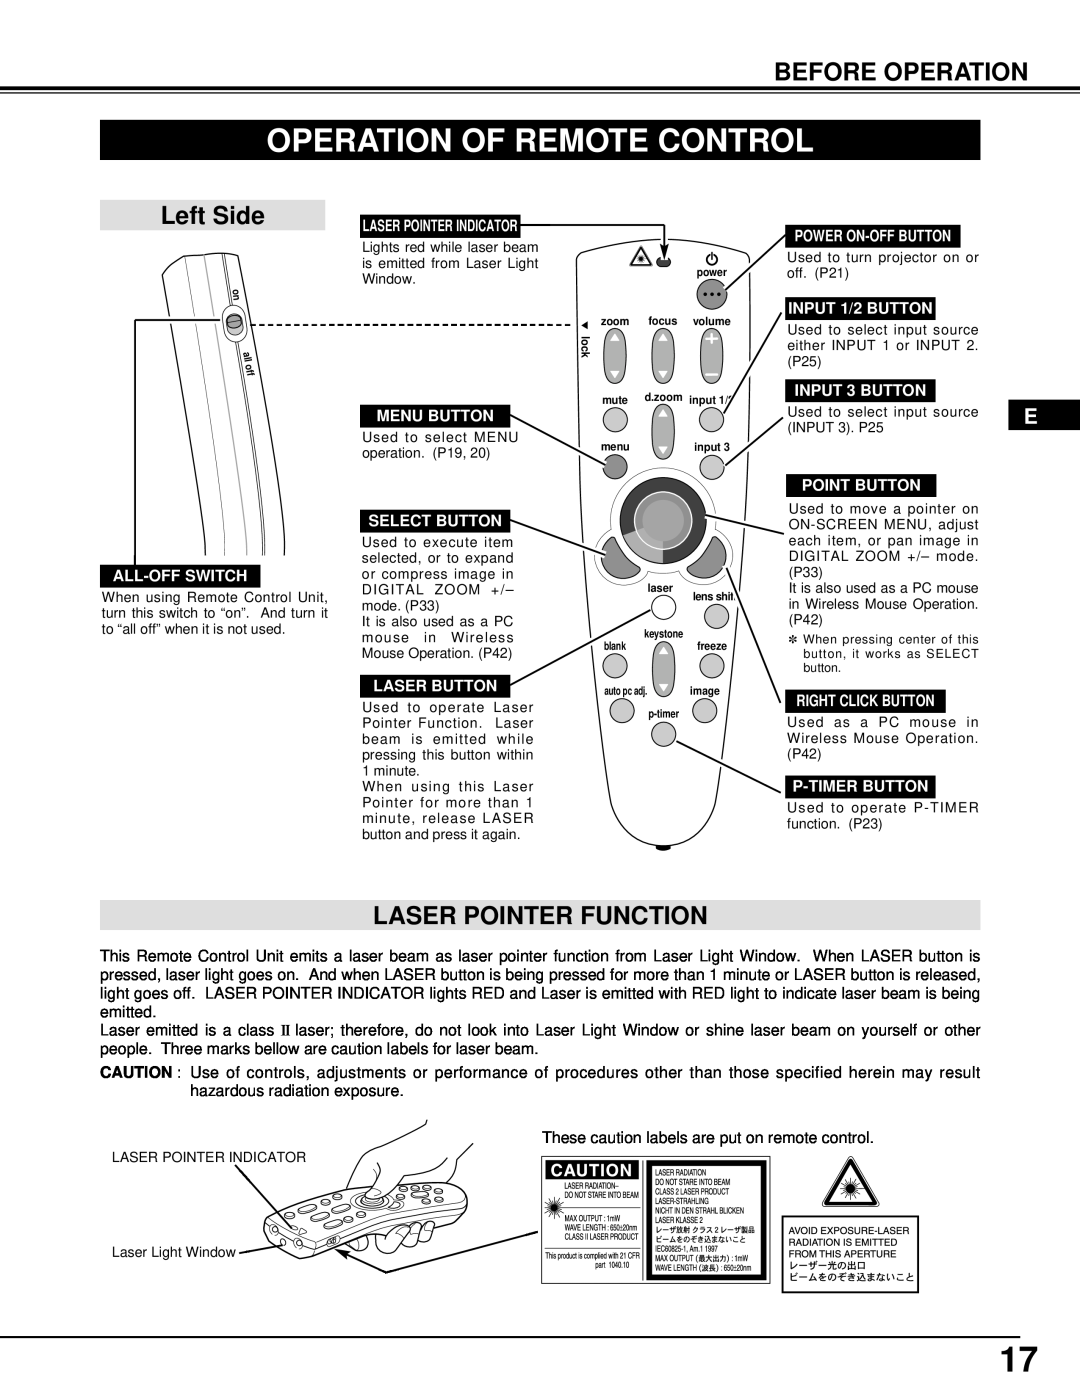 Dukane 28A8945, 28A9058 manual Operation Of Remote Control, Left Side, Laser Pointer Function, Before Operation 